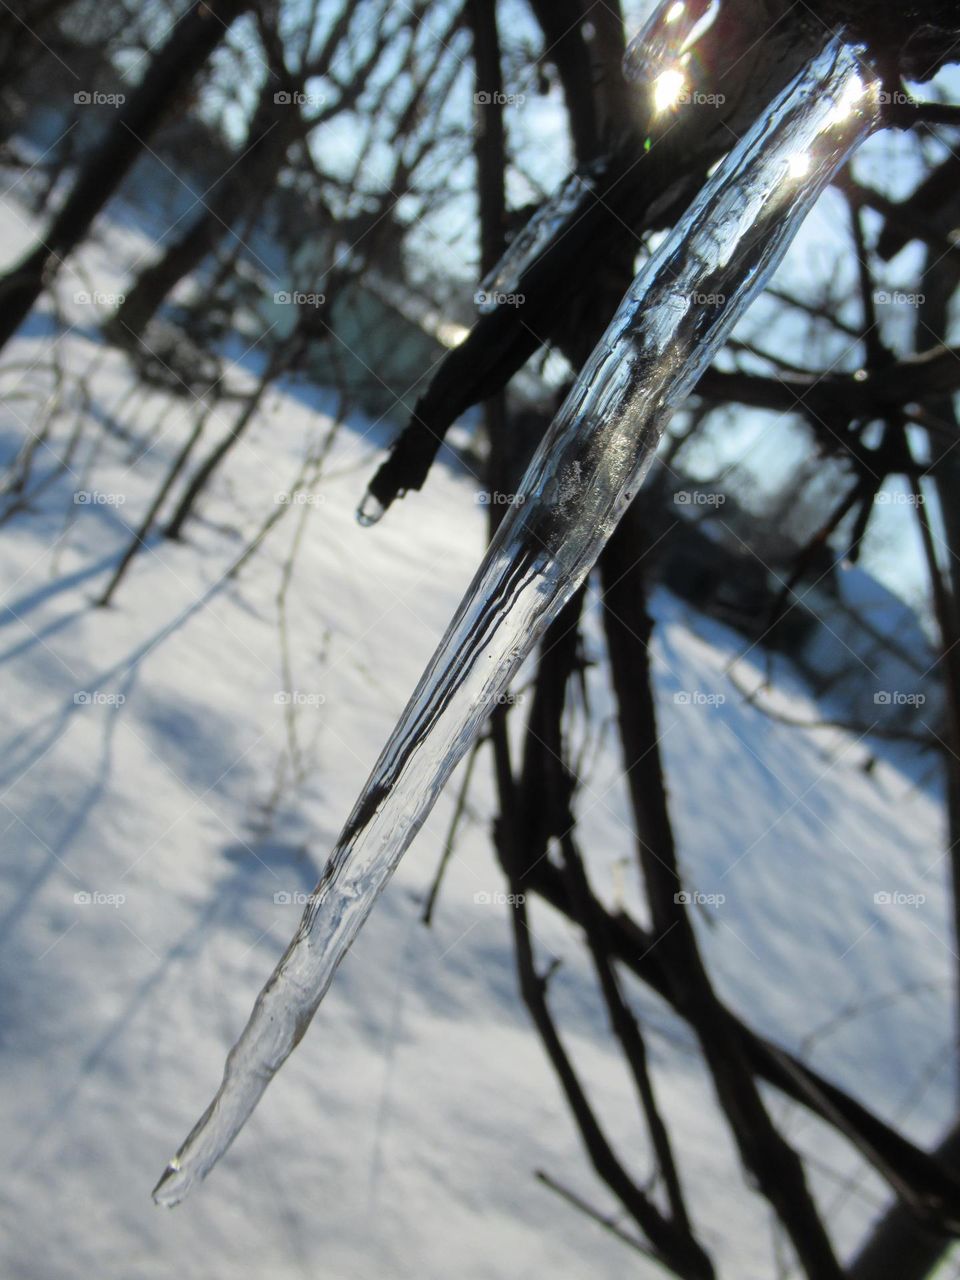 spring is coming, icicles with legs are in a hurry